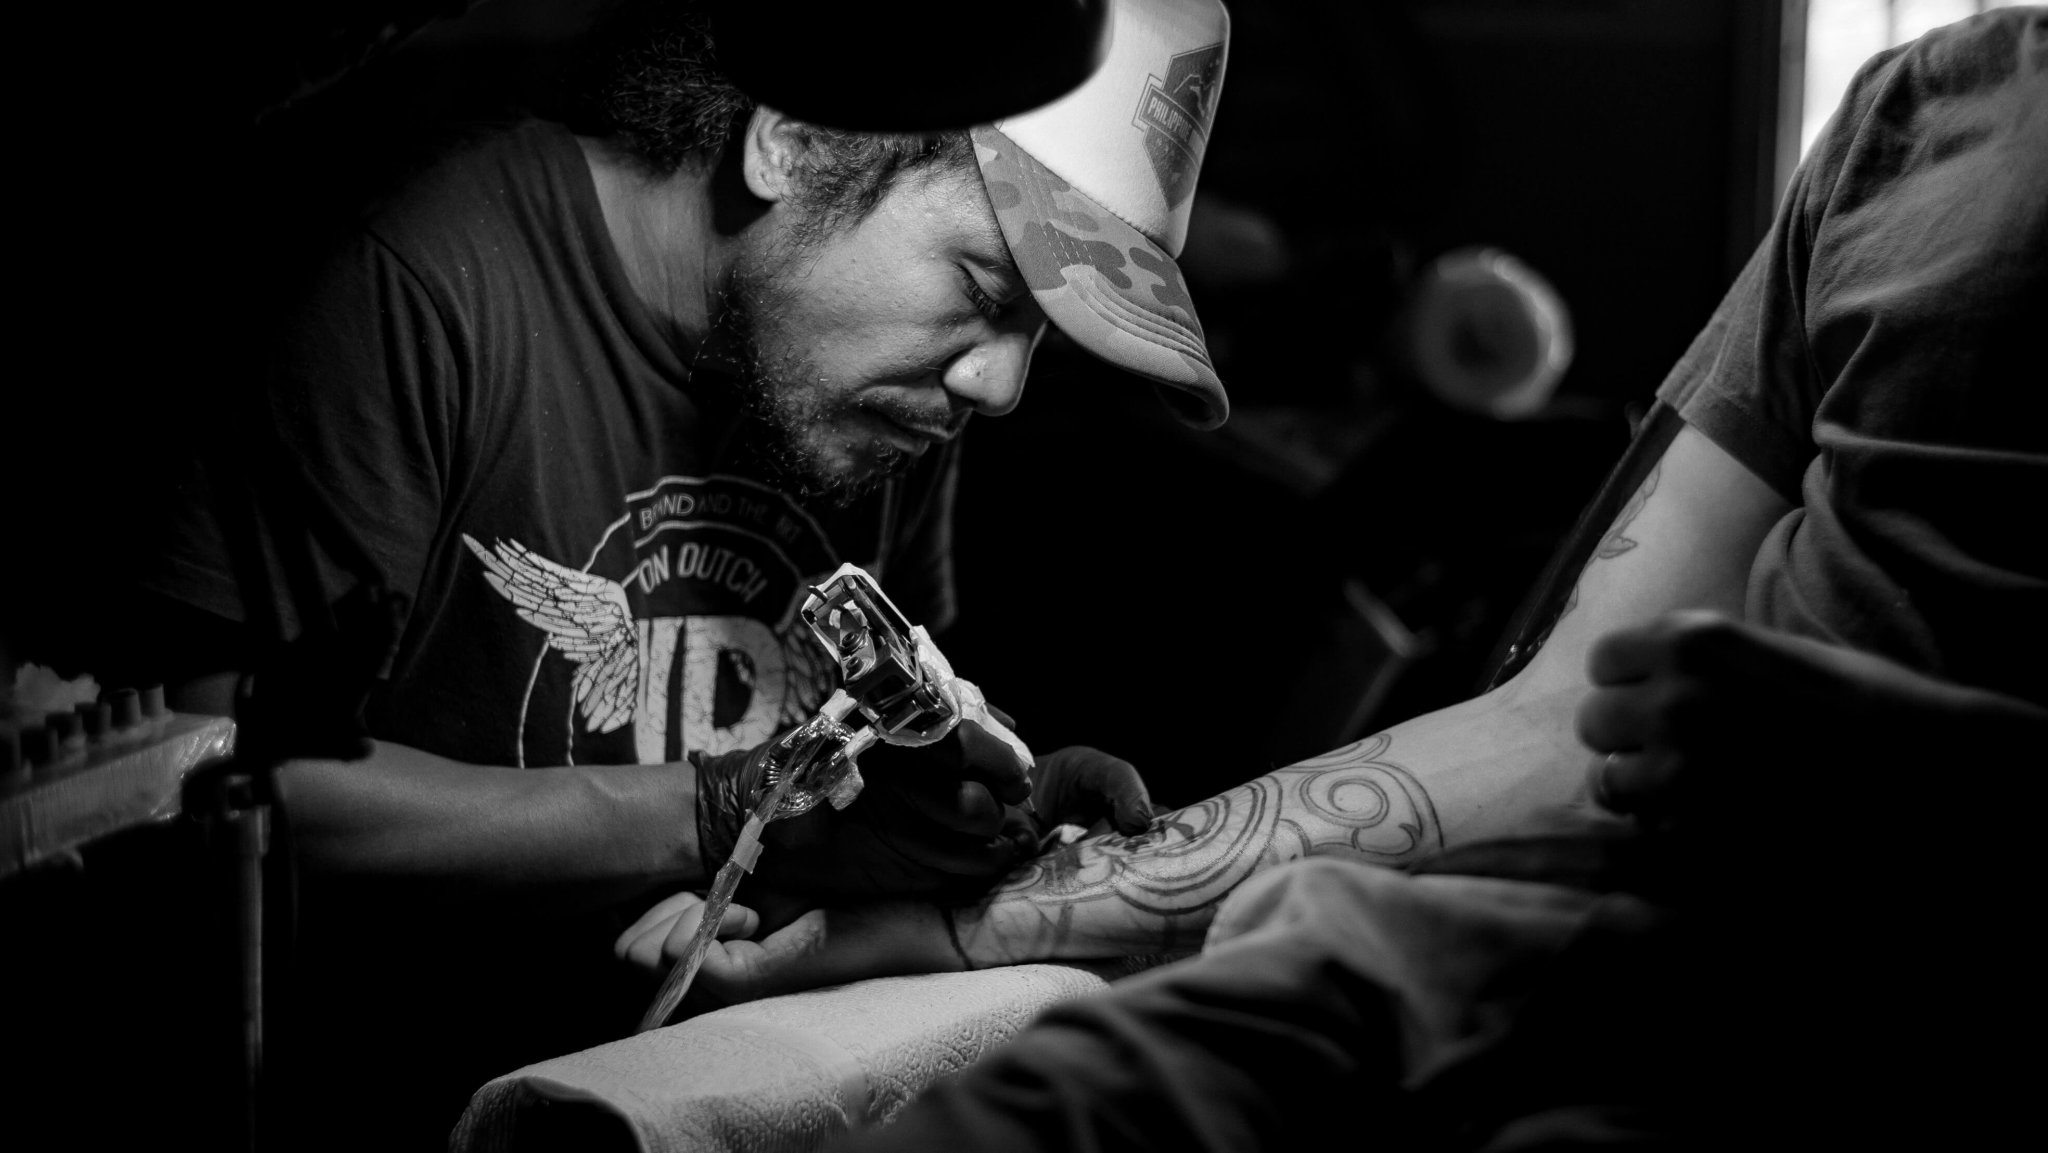 Get your tickets for the Australian Tattoo Expo at ICC Sydney